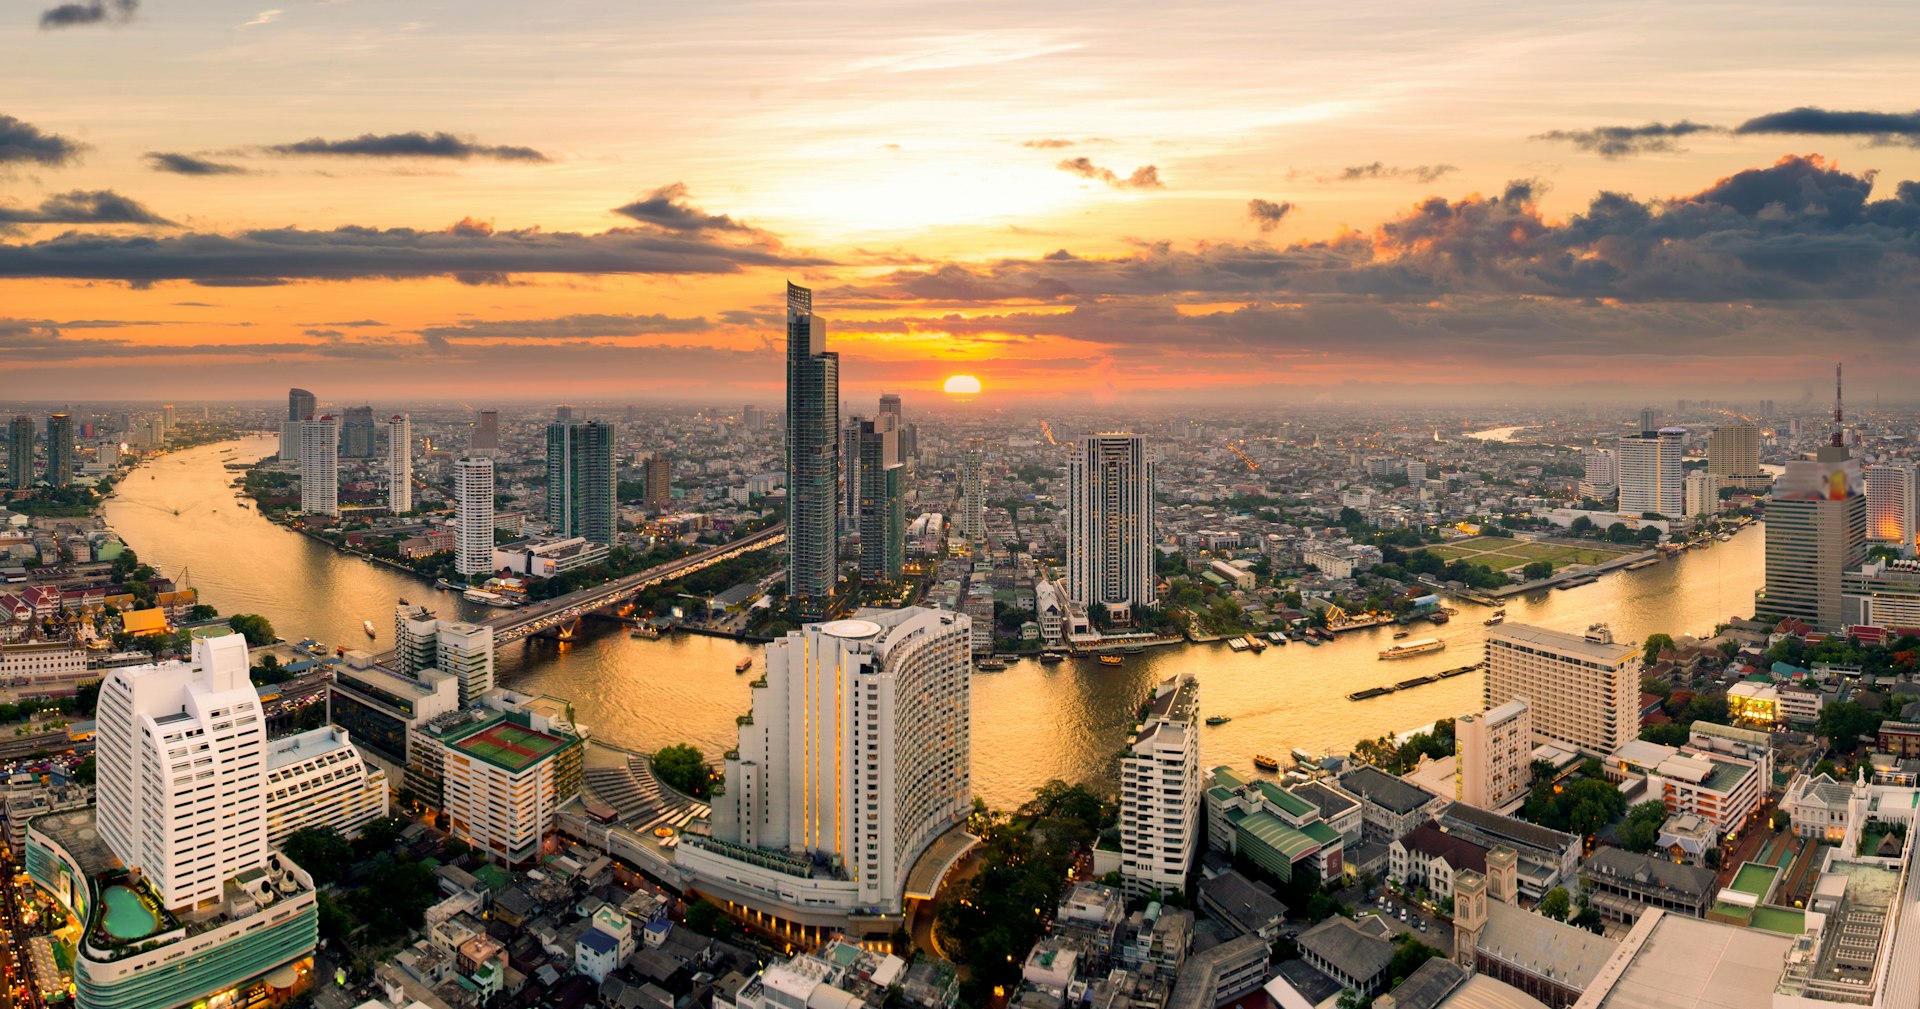 The Bangkok skyline bathed in the tangerine glow of the sun with skyscrapers reaching for the sky as a panoramic view scans around the bend of the river Chao Phraya.